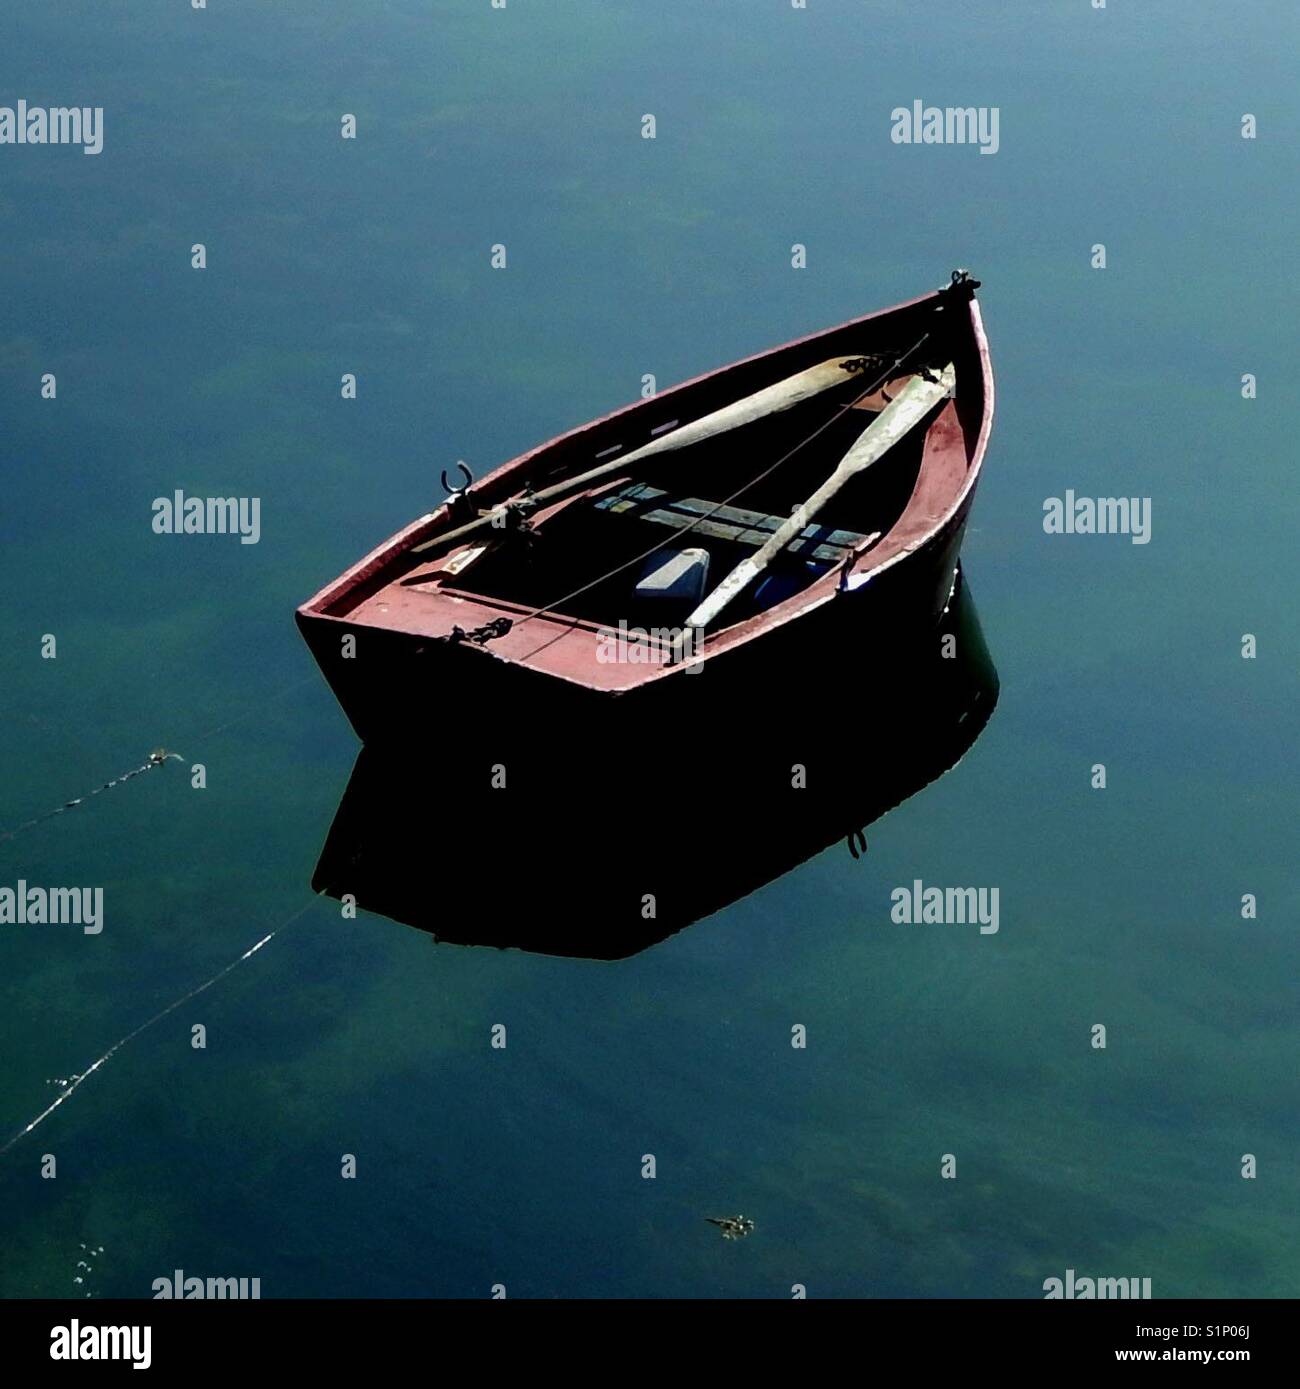 Rowing boat on the mirror-like surface of a lake Stock Photo